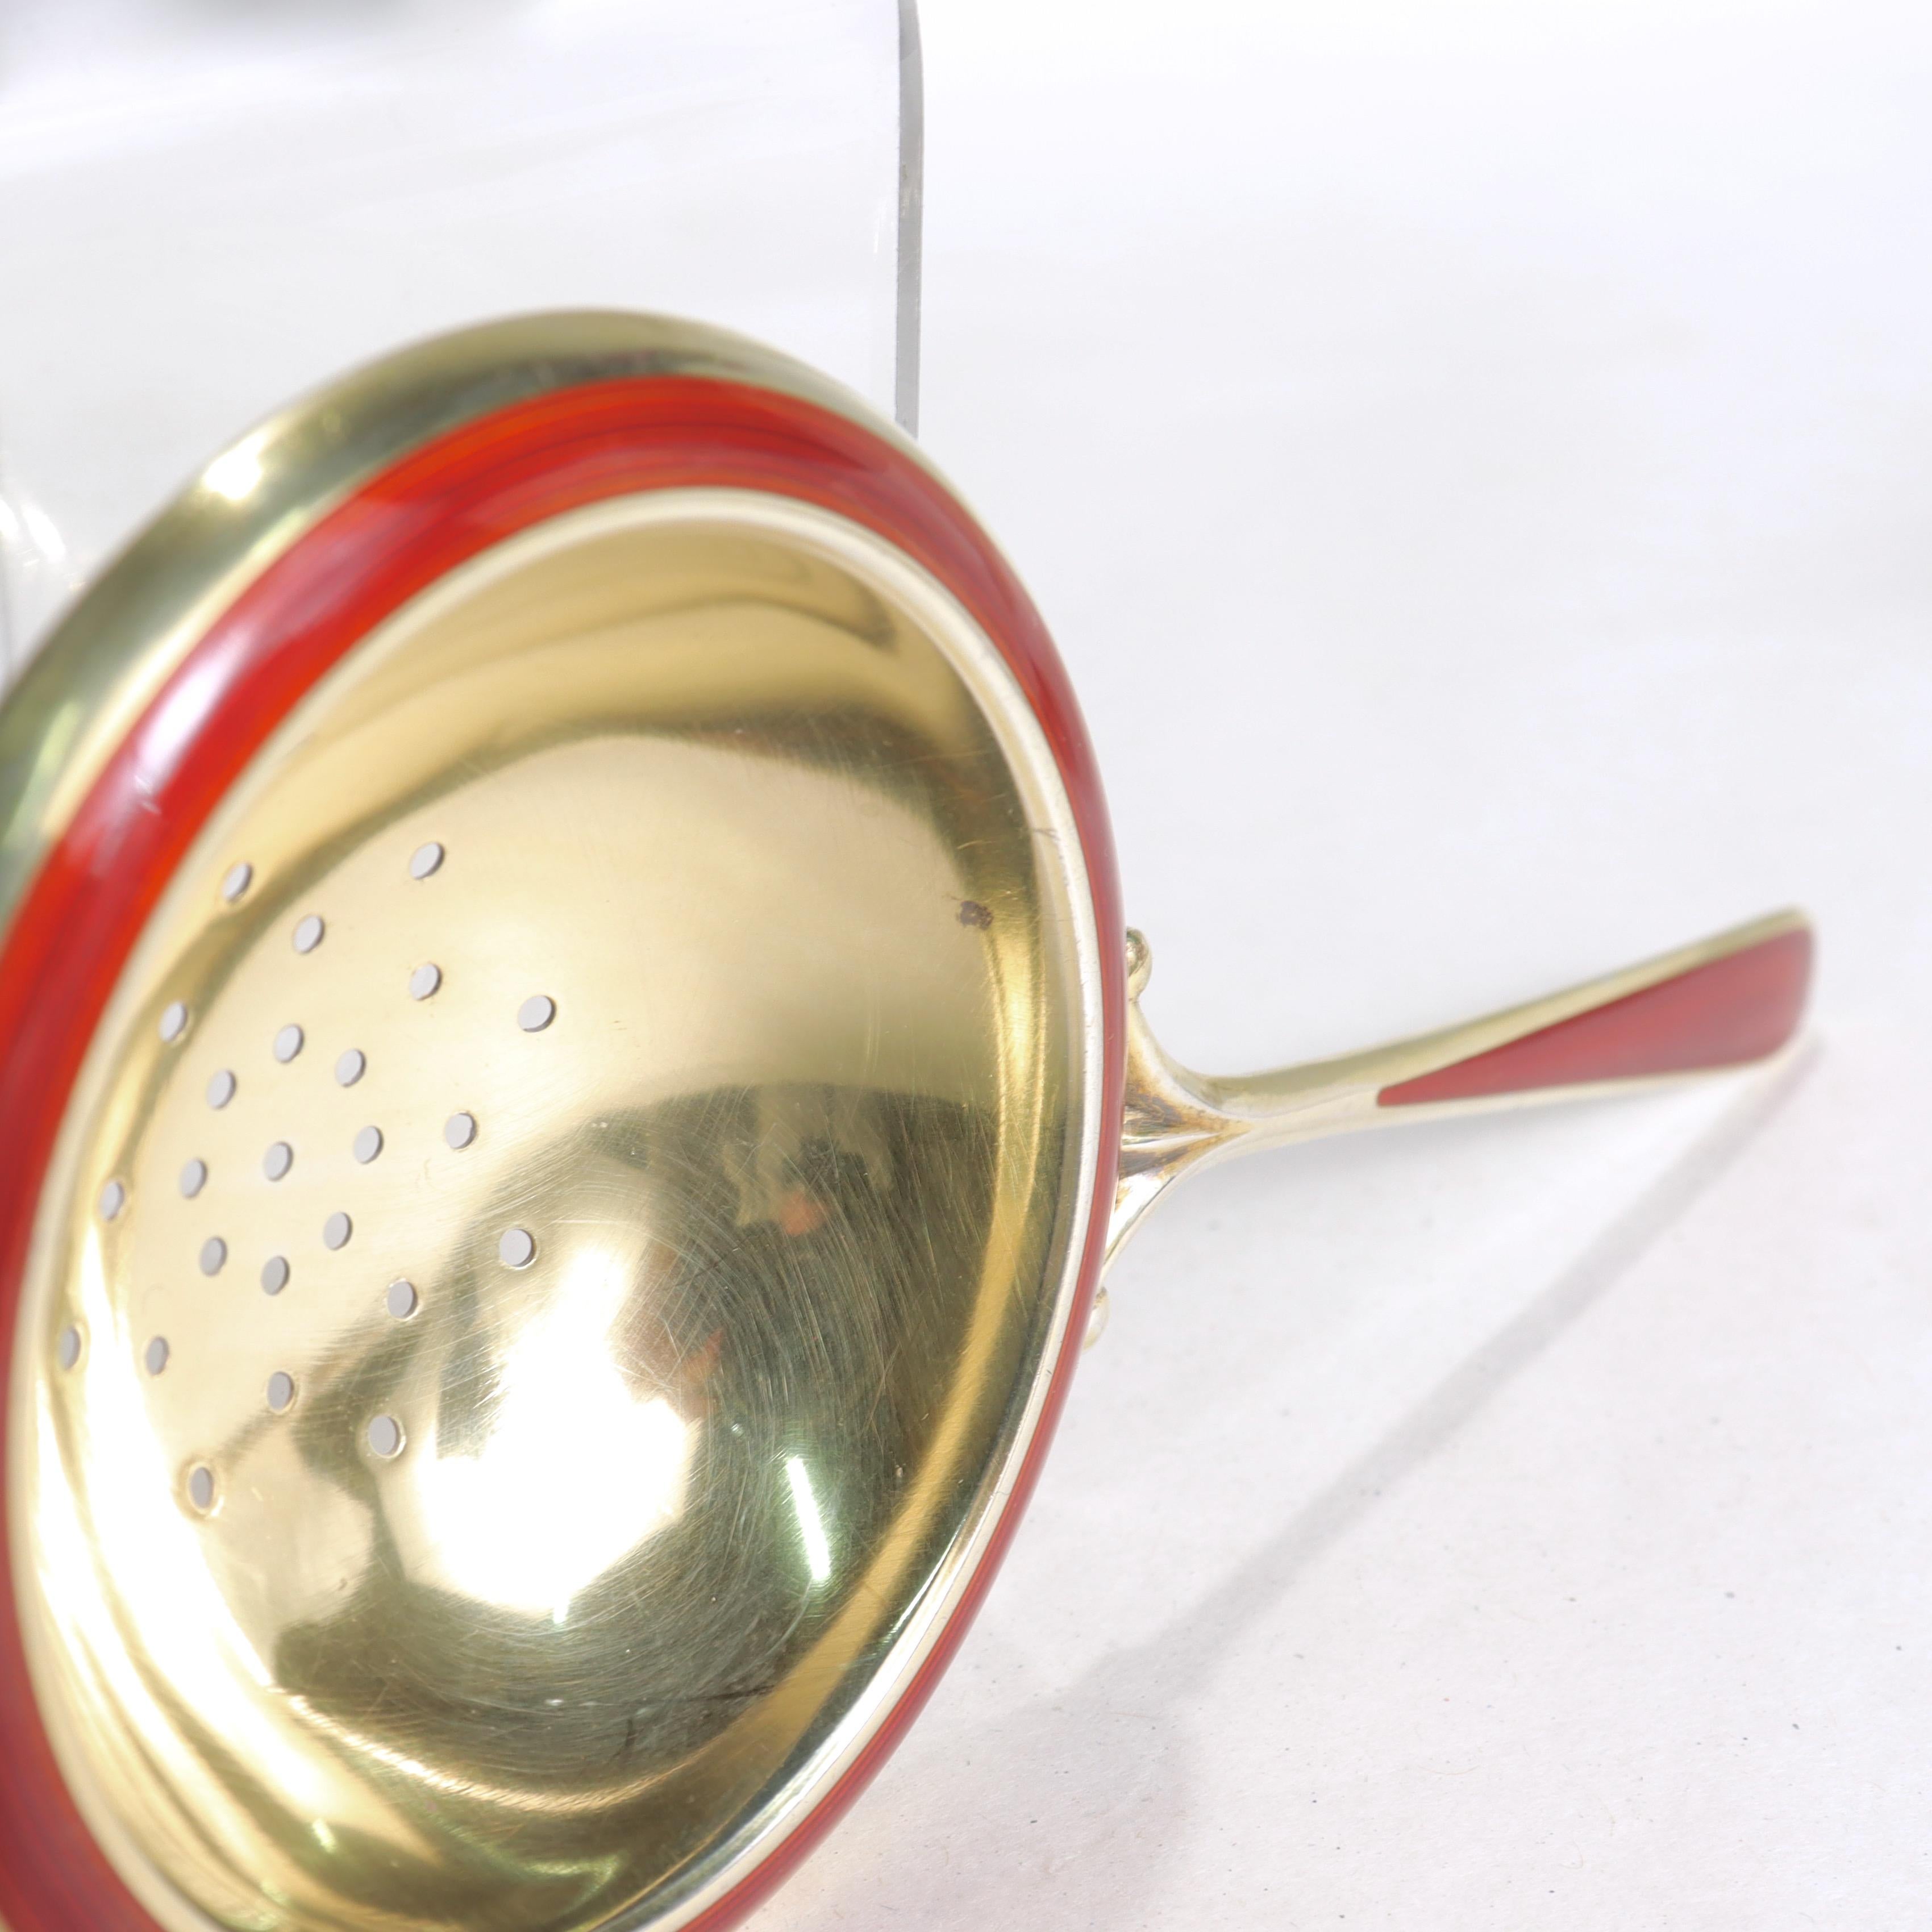 Antique Art Deco Red Enamel & Gilt Sterling Silver Tea Strainer by N.M. Thune For Sale 4